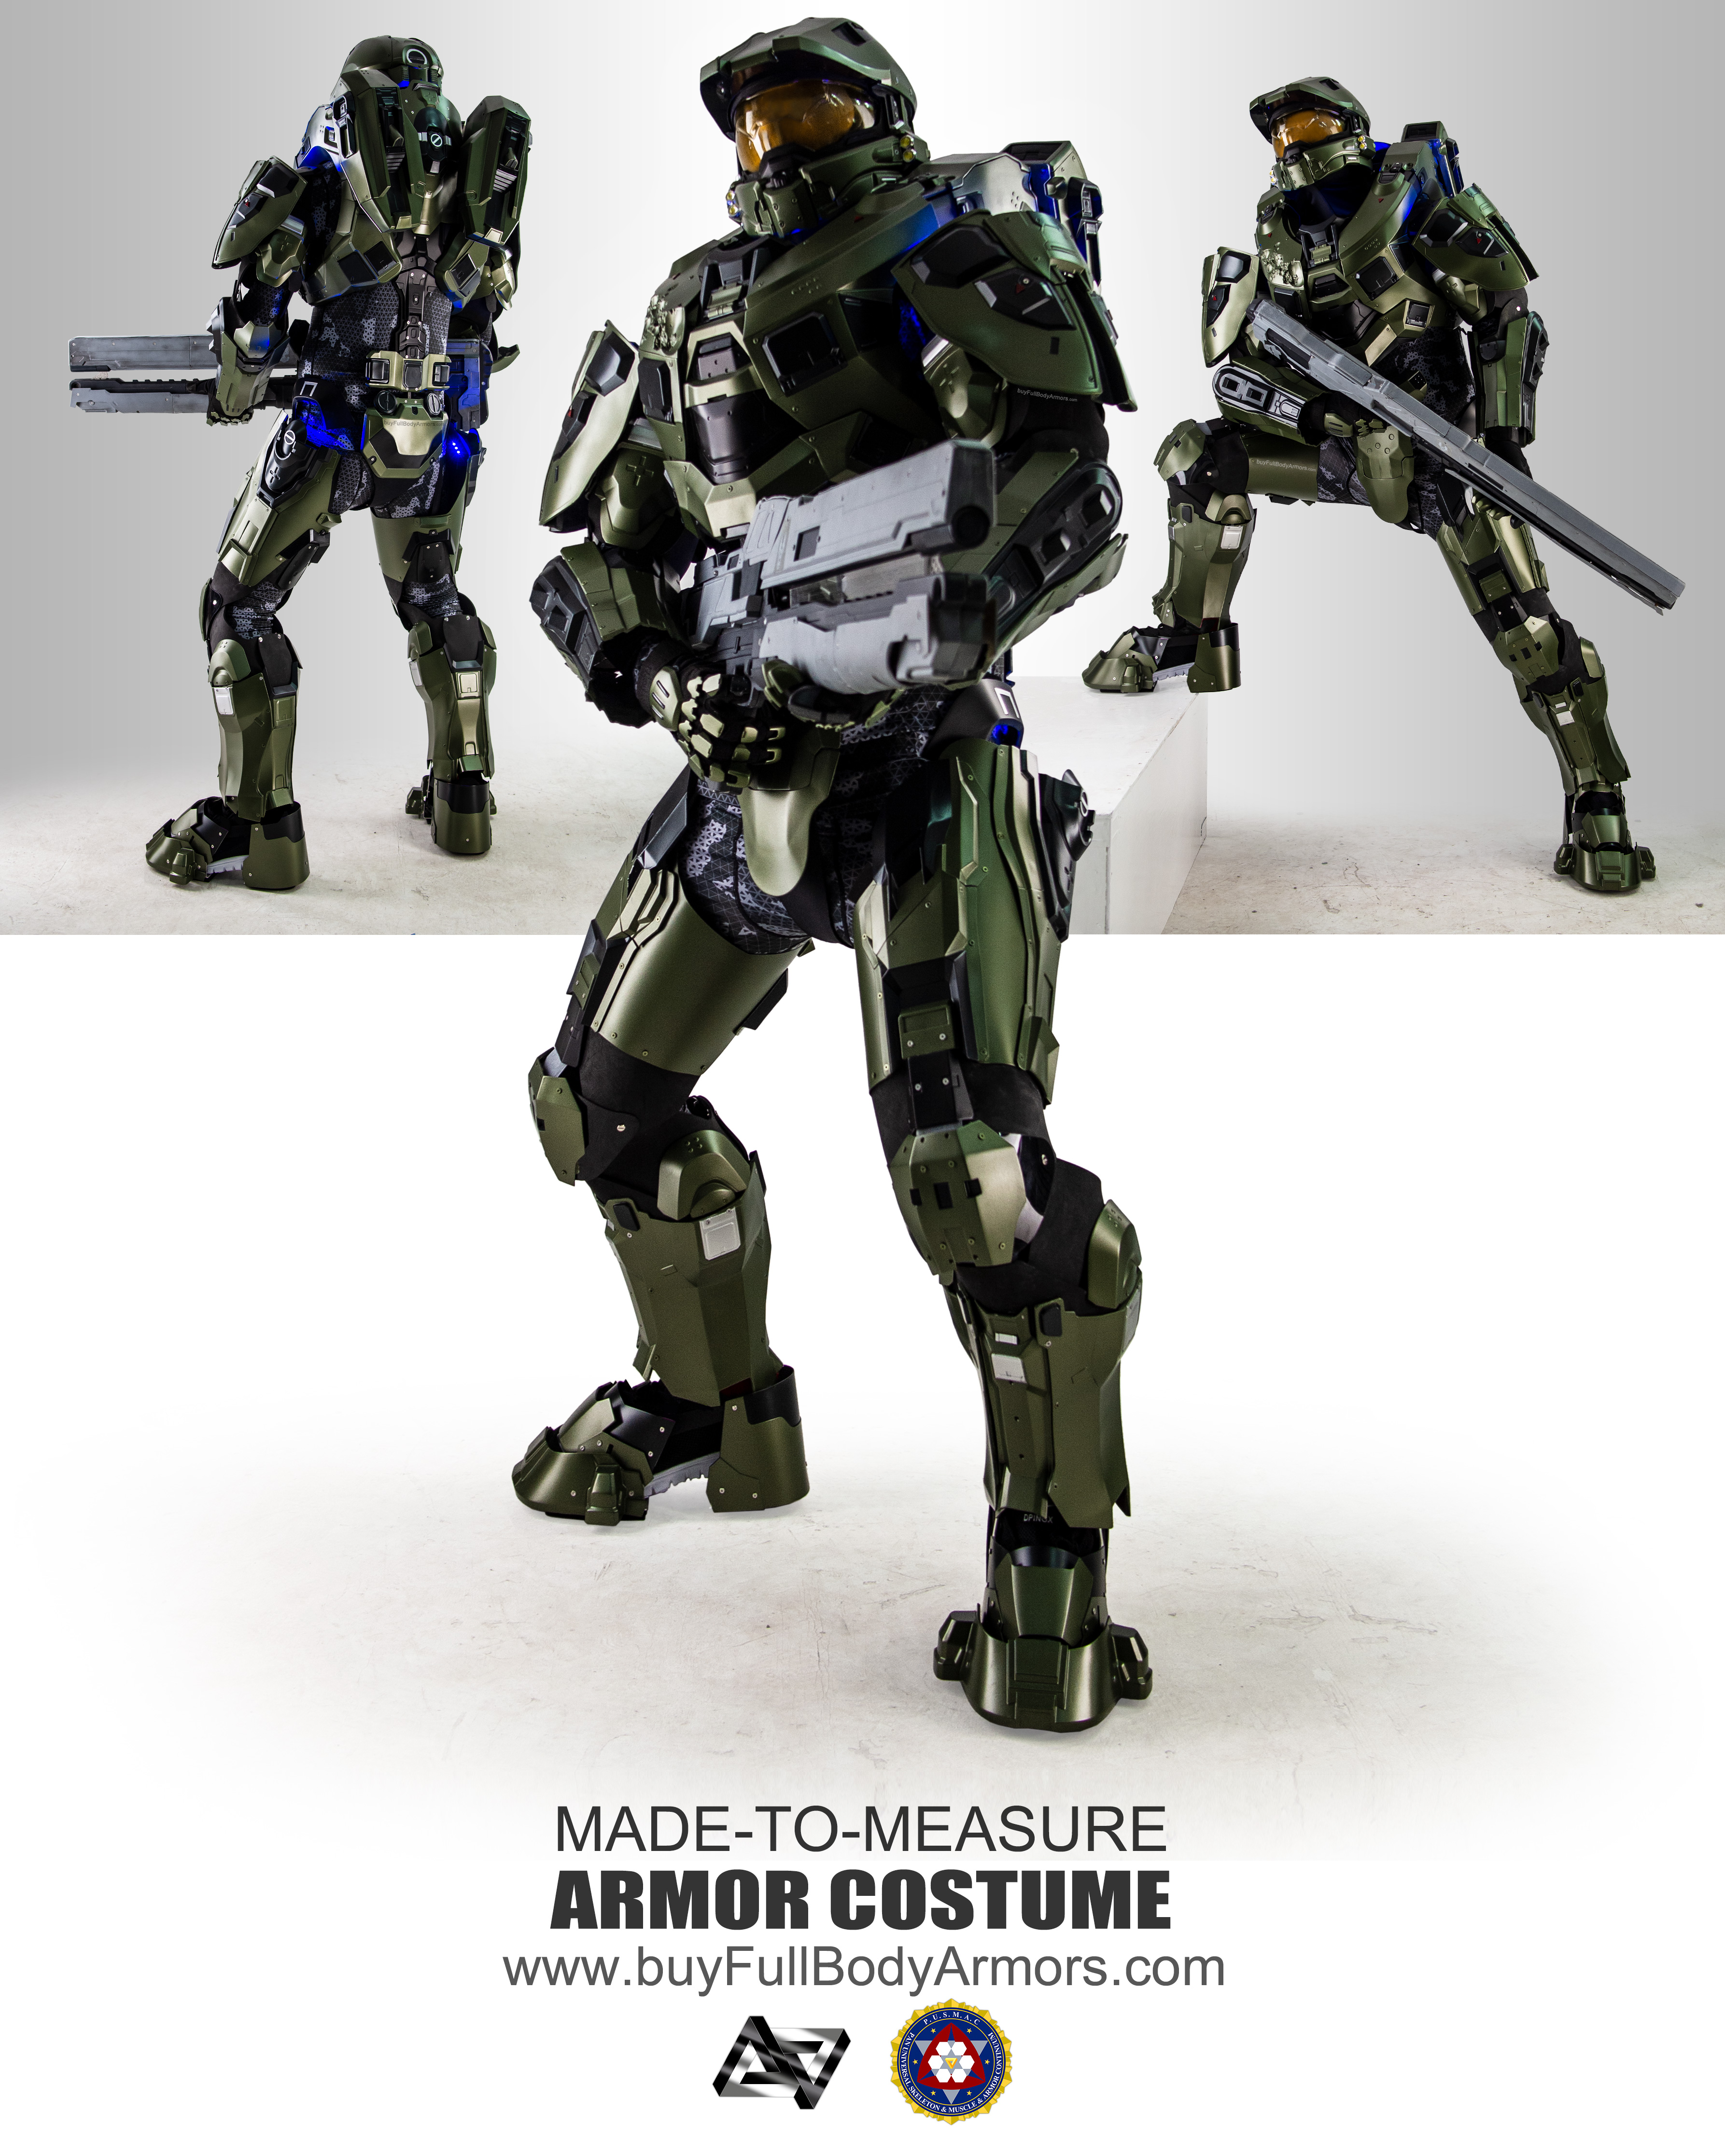 Wearable Halo 4 and Halo 5 Master Chief Armor Mark VI Suit Costume photo 1